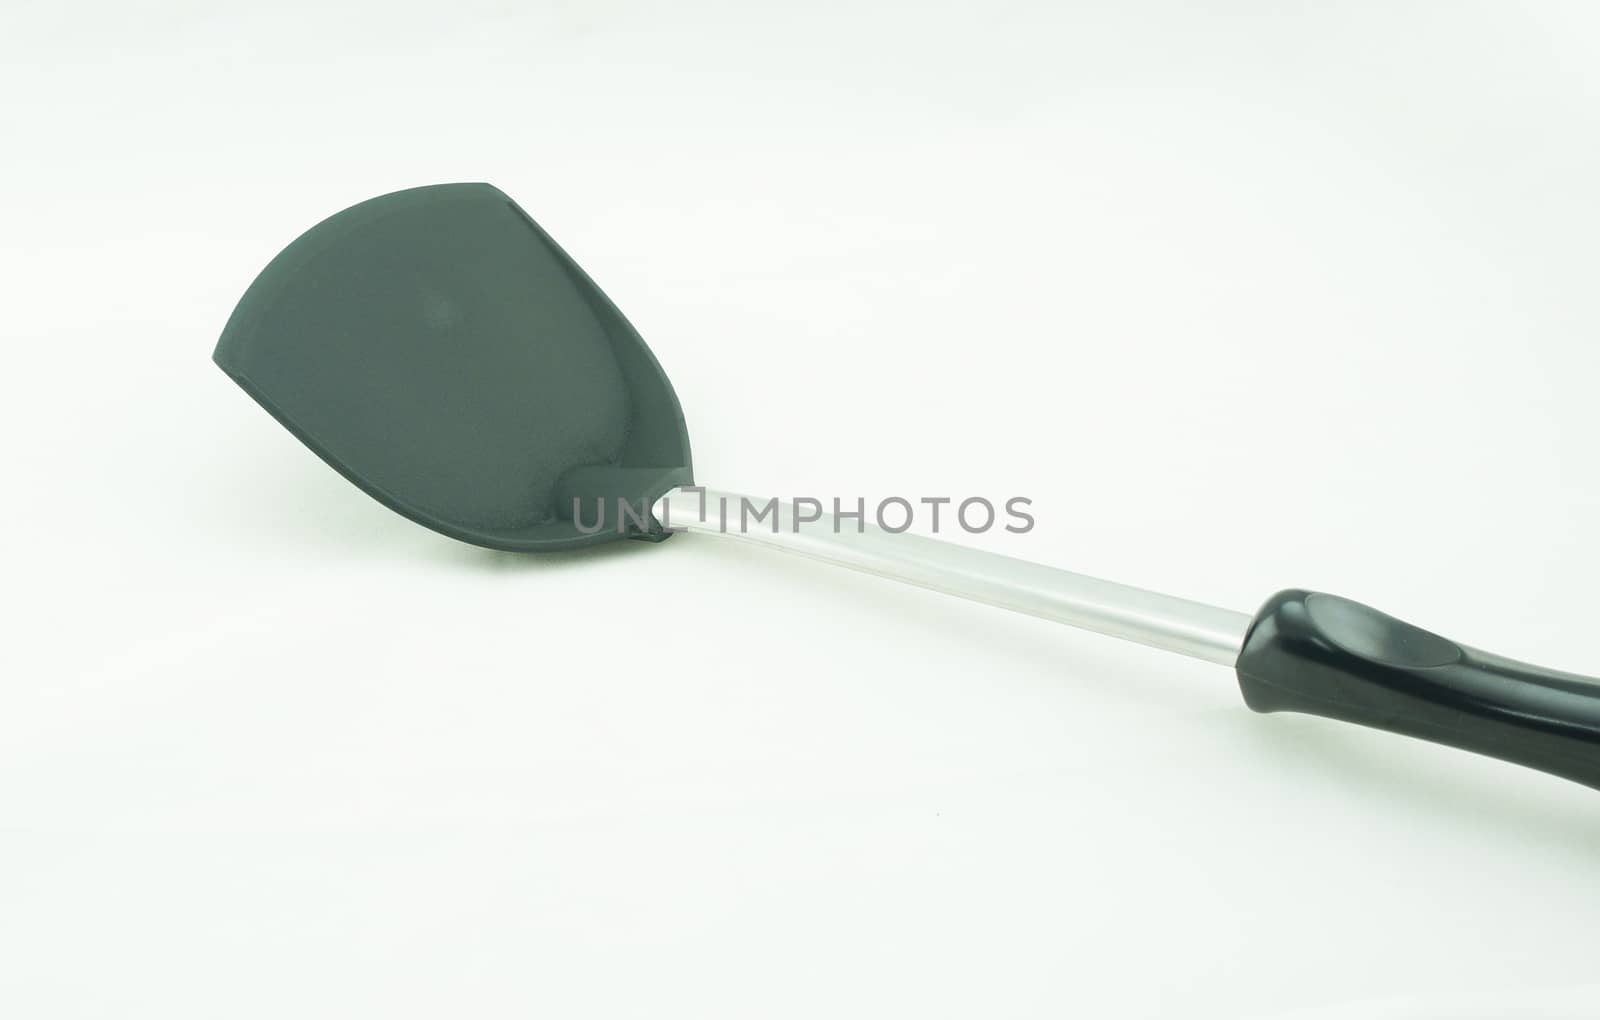 Kitchen spatula, kitchen utensil, the scoop and handle made plastic, the center shaft made from stainless steel.                                